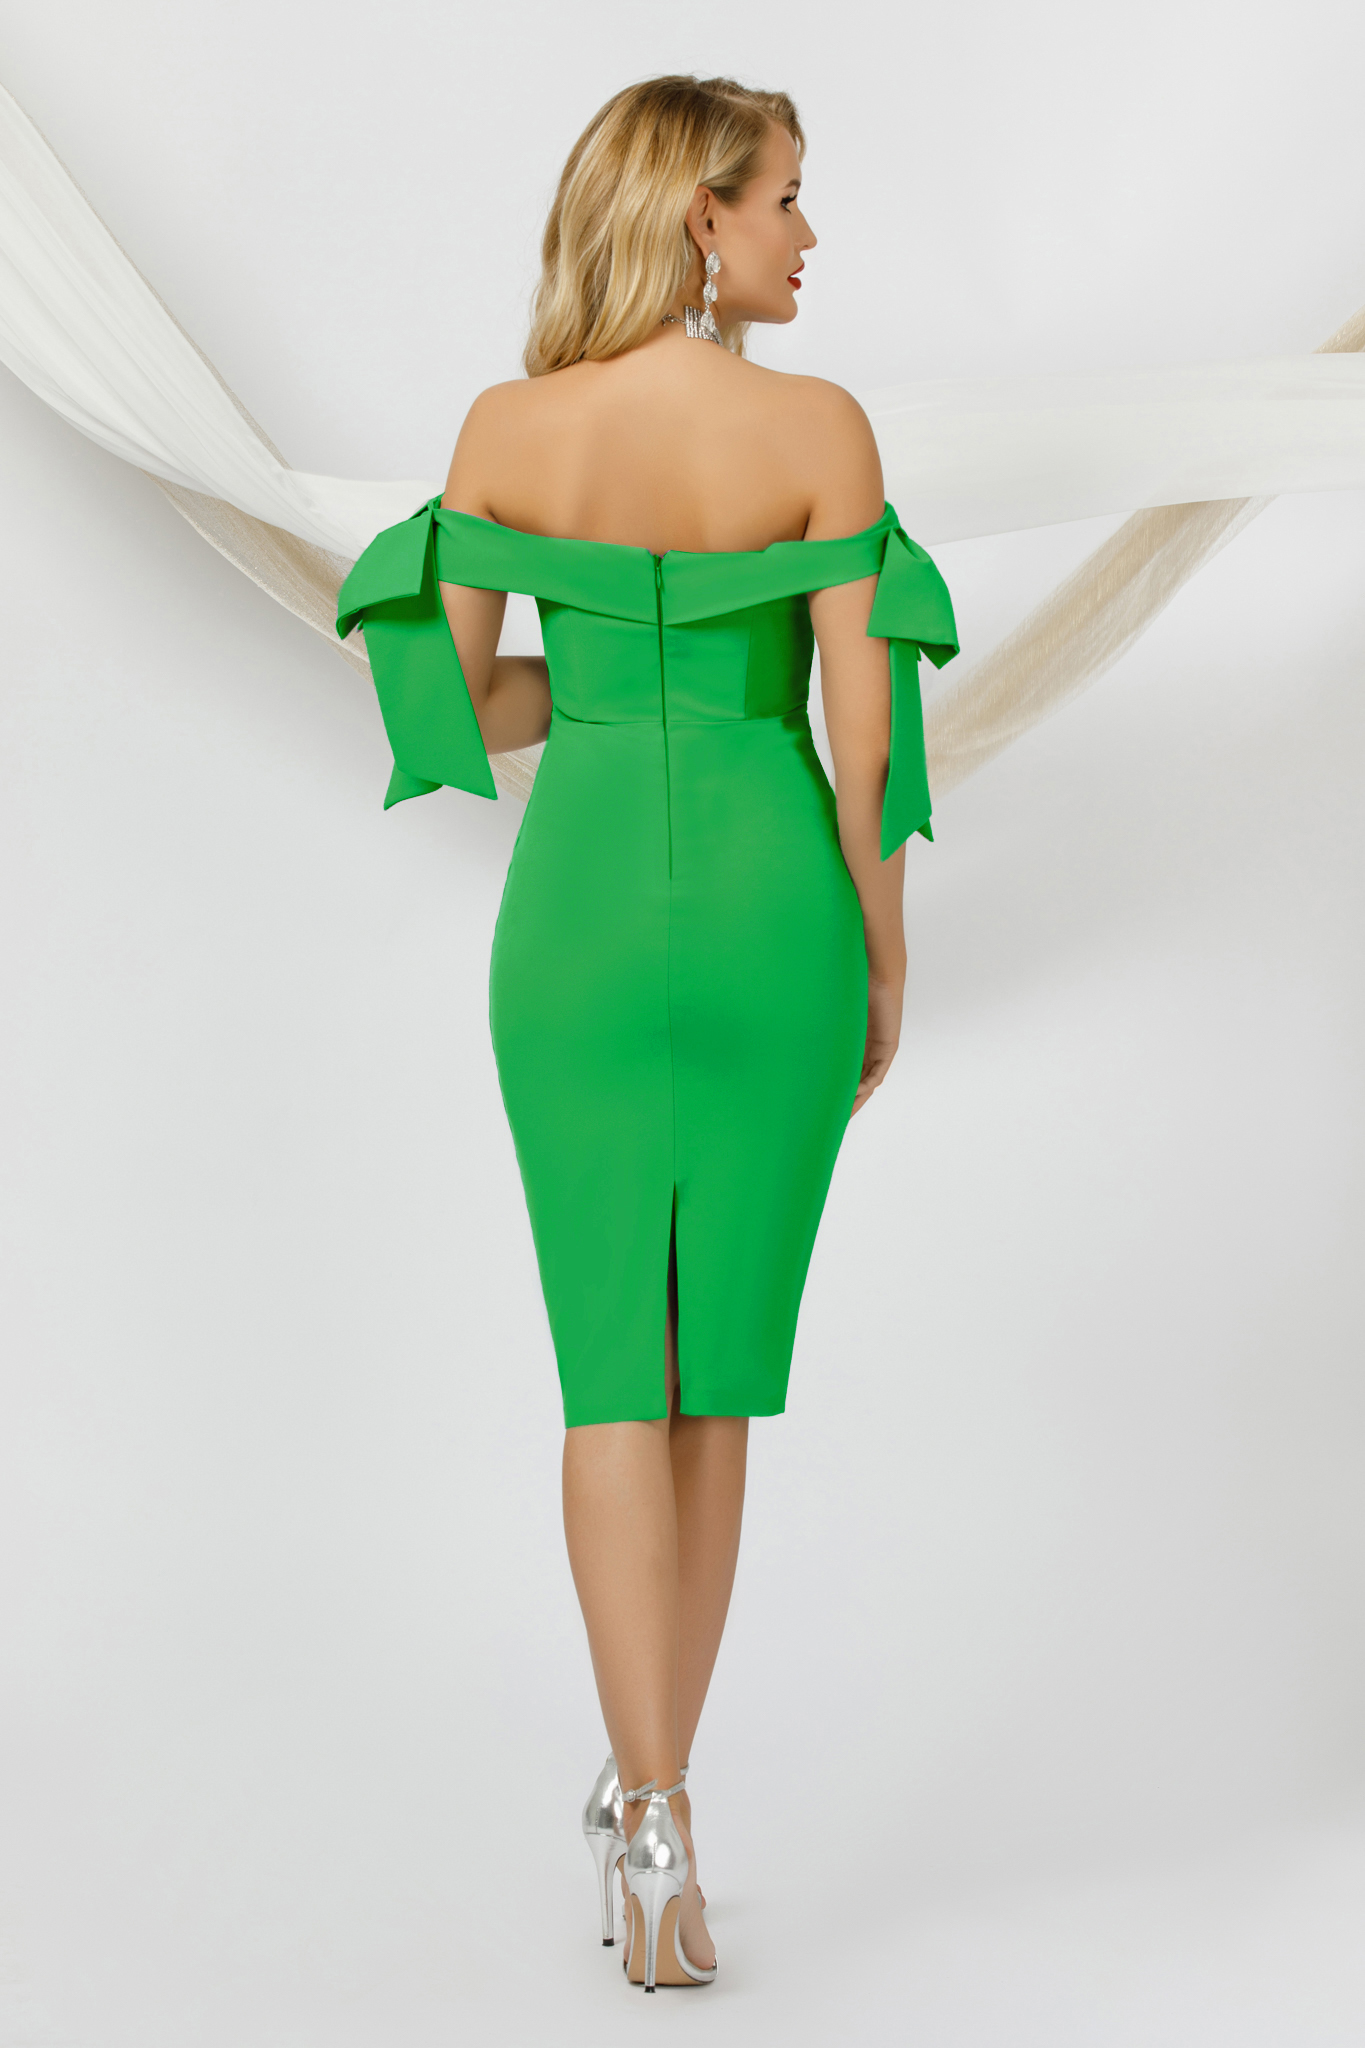 Green pencil dress made of thin material accessorized with bows - PrettyGirl 2 - StarShinerS.com